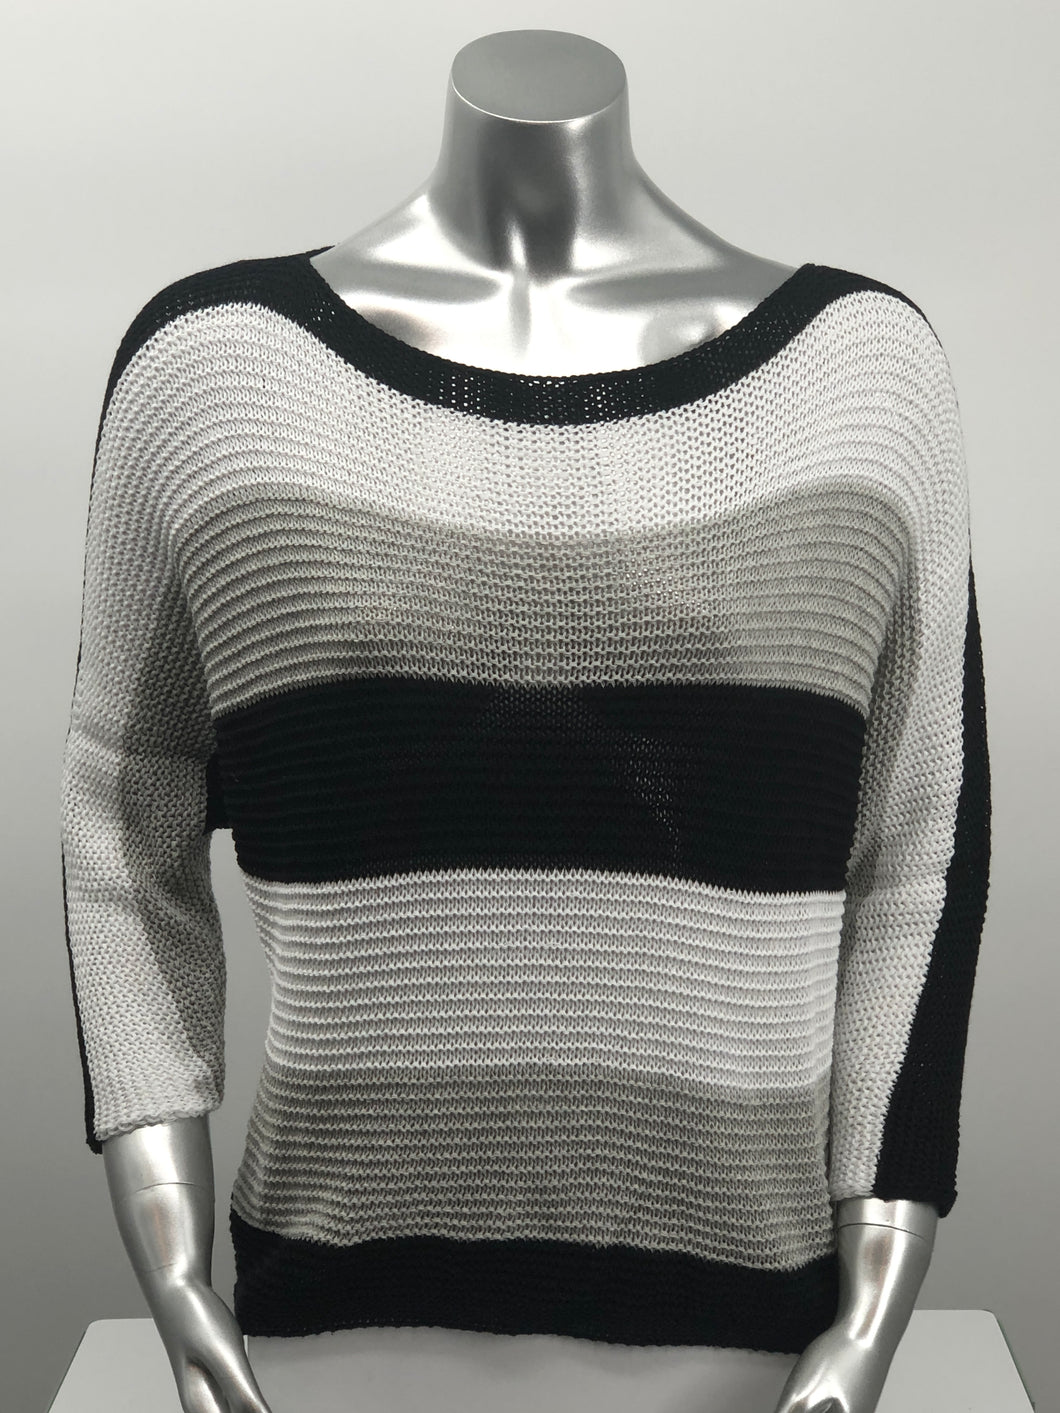 For those cool summer nights, or Caryl sweater is the perfect piece to keep warm.  Not too heavy and not too light, this knit sweater is fashionable and functional.  The colorblock colors in white, gray and black are so on trend and literally goes with so many different bottoms.  As this 3/4 sleeve sweater is not a tight knit, it is slightly see-through.  Wear over a bralette, tank or nude bra if preferred.  